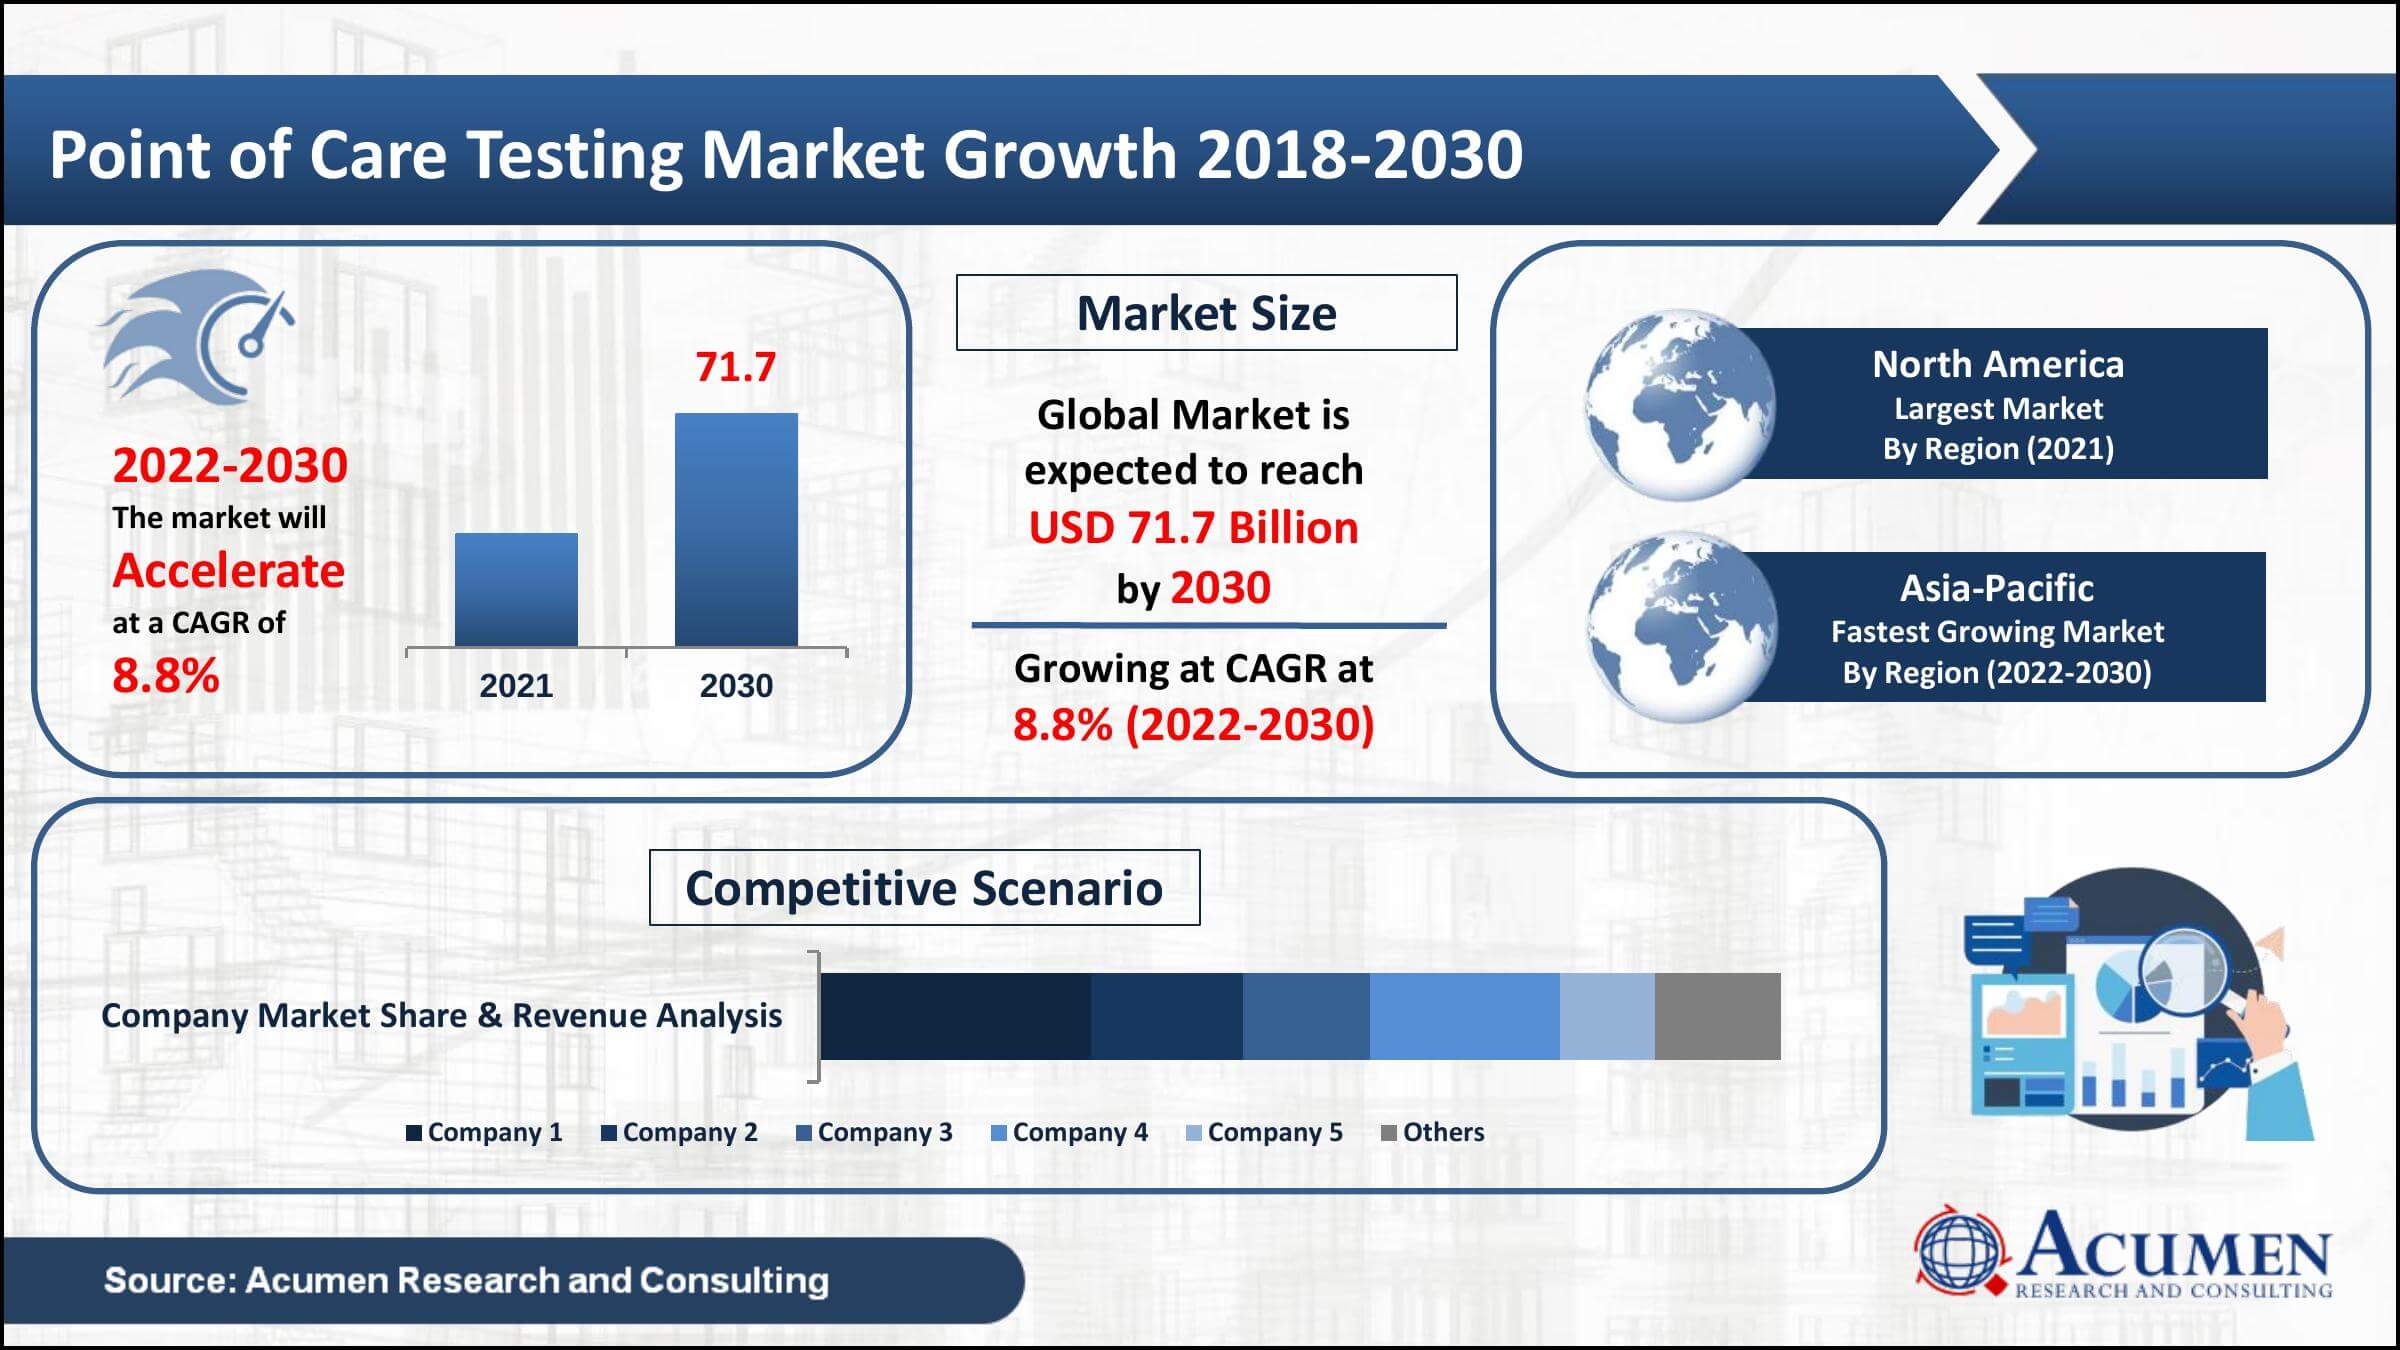 Global point of care testing market revenue collected USD 33.7 Billion in 2021, with a 8.8% CAGR between 2022 and 2030